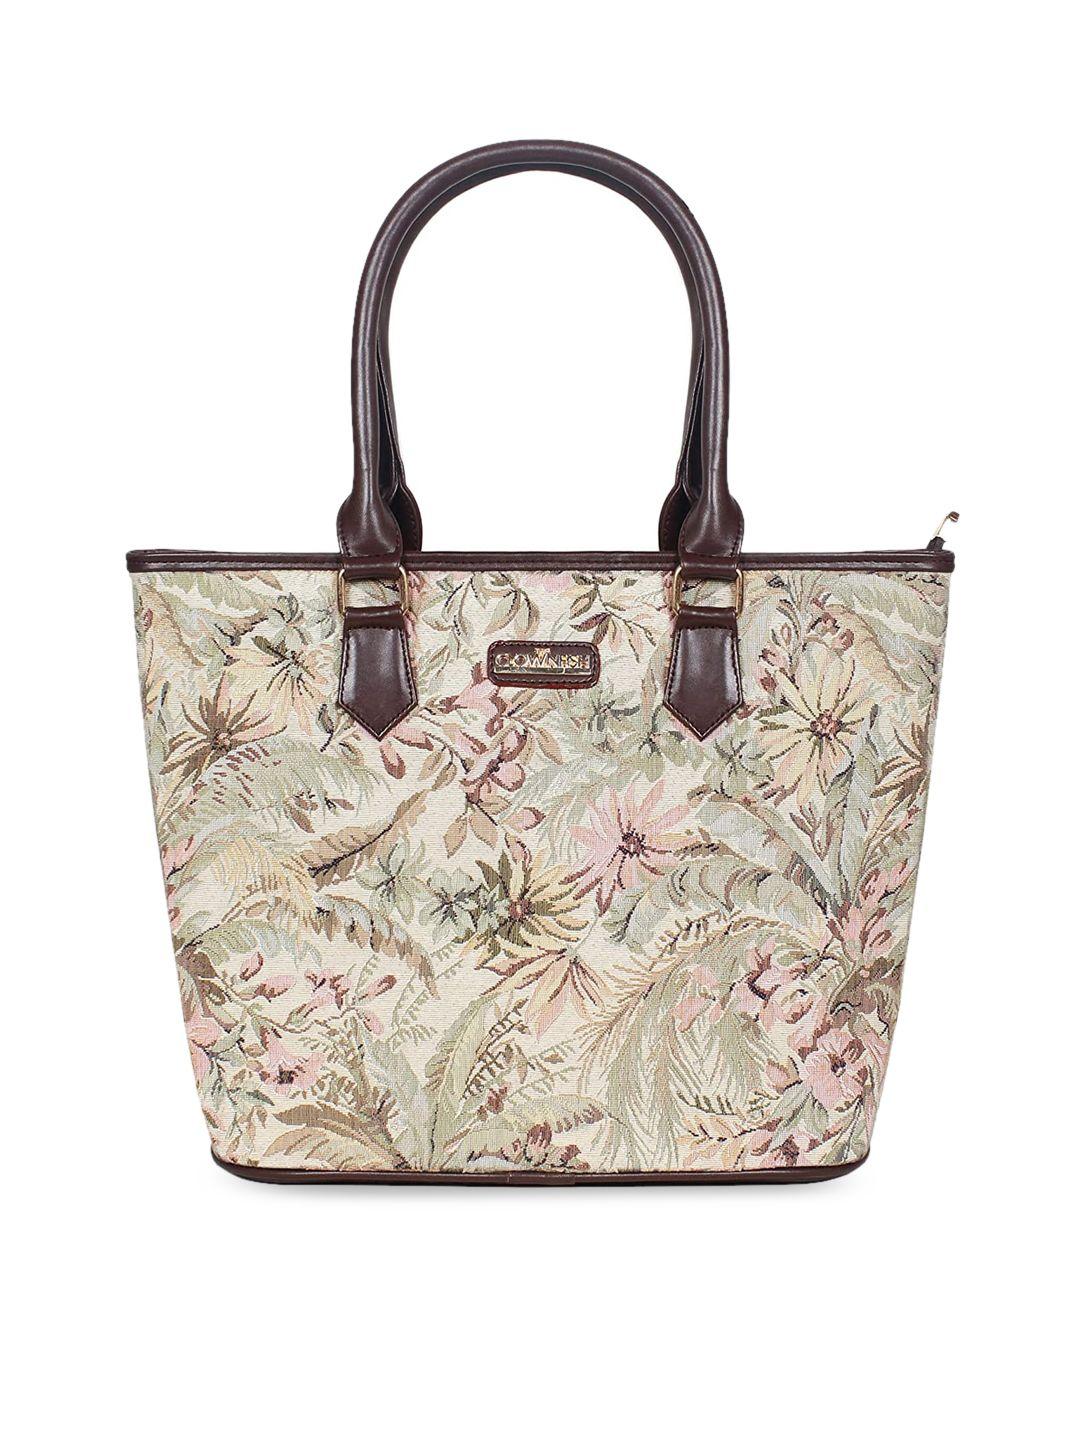 the clownfish beige and brown floral leather structured shoulder bag